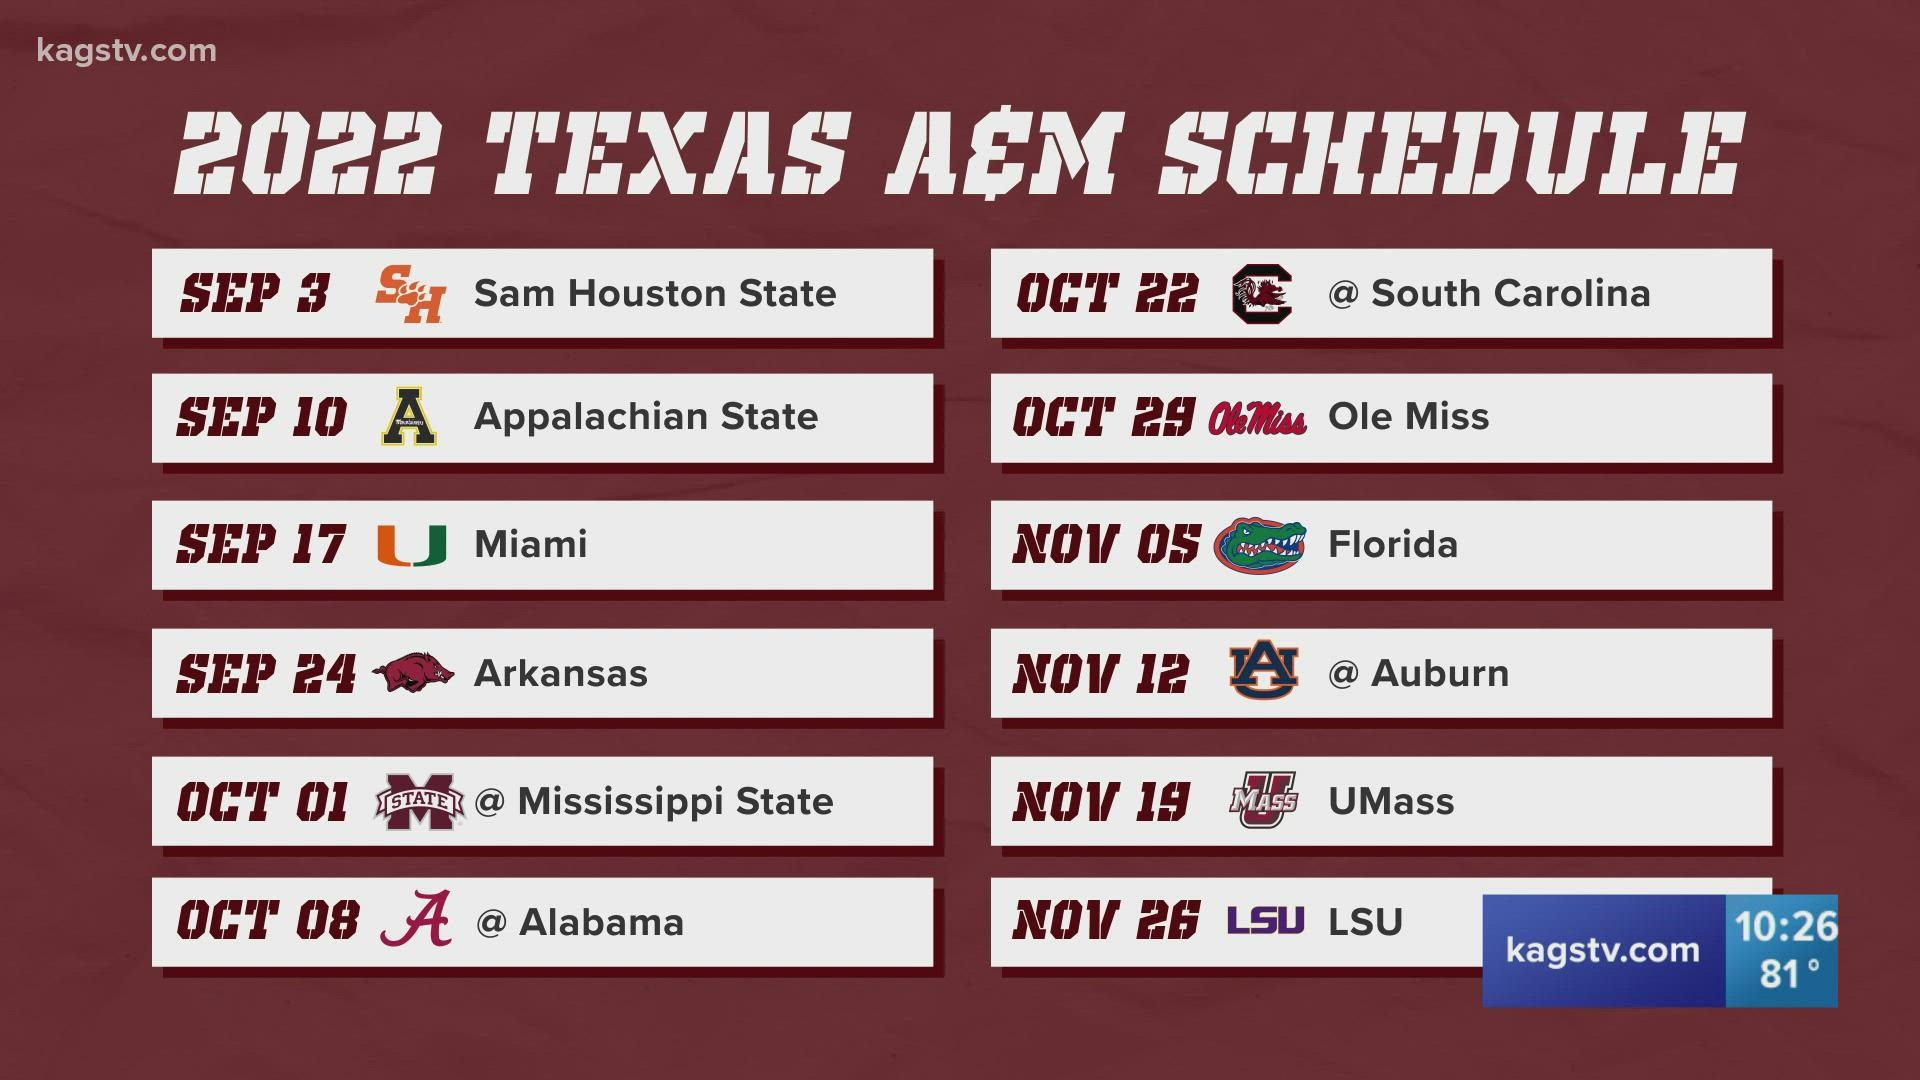 Texas A&M Football On Twitter "ICYMI Our 2016 Football Schedule Was